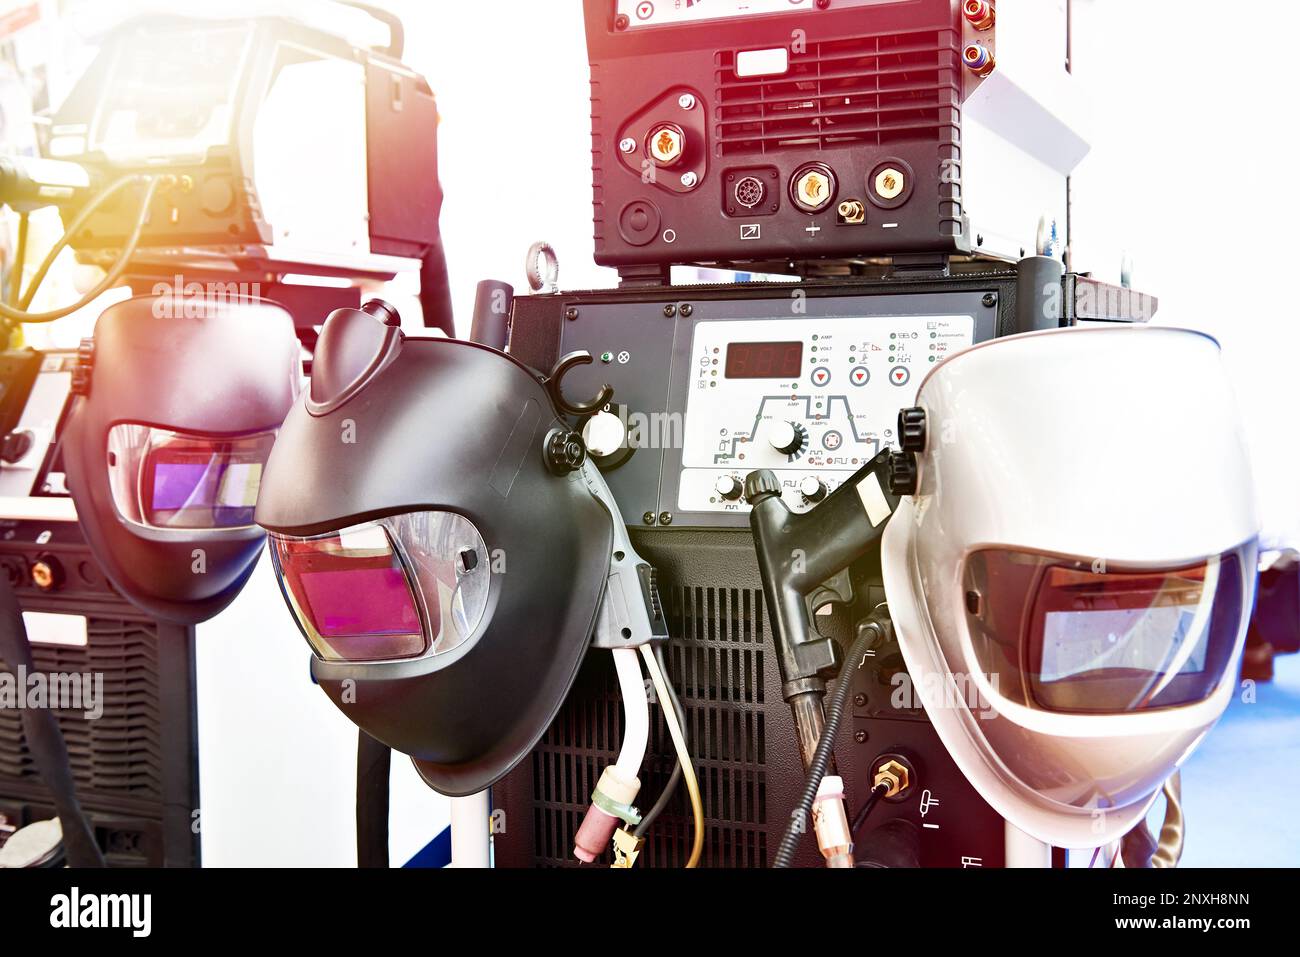 Inverter devices for welding and protective masks Stock Photo